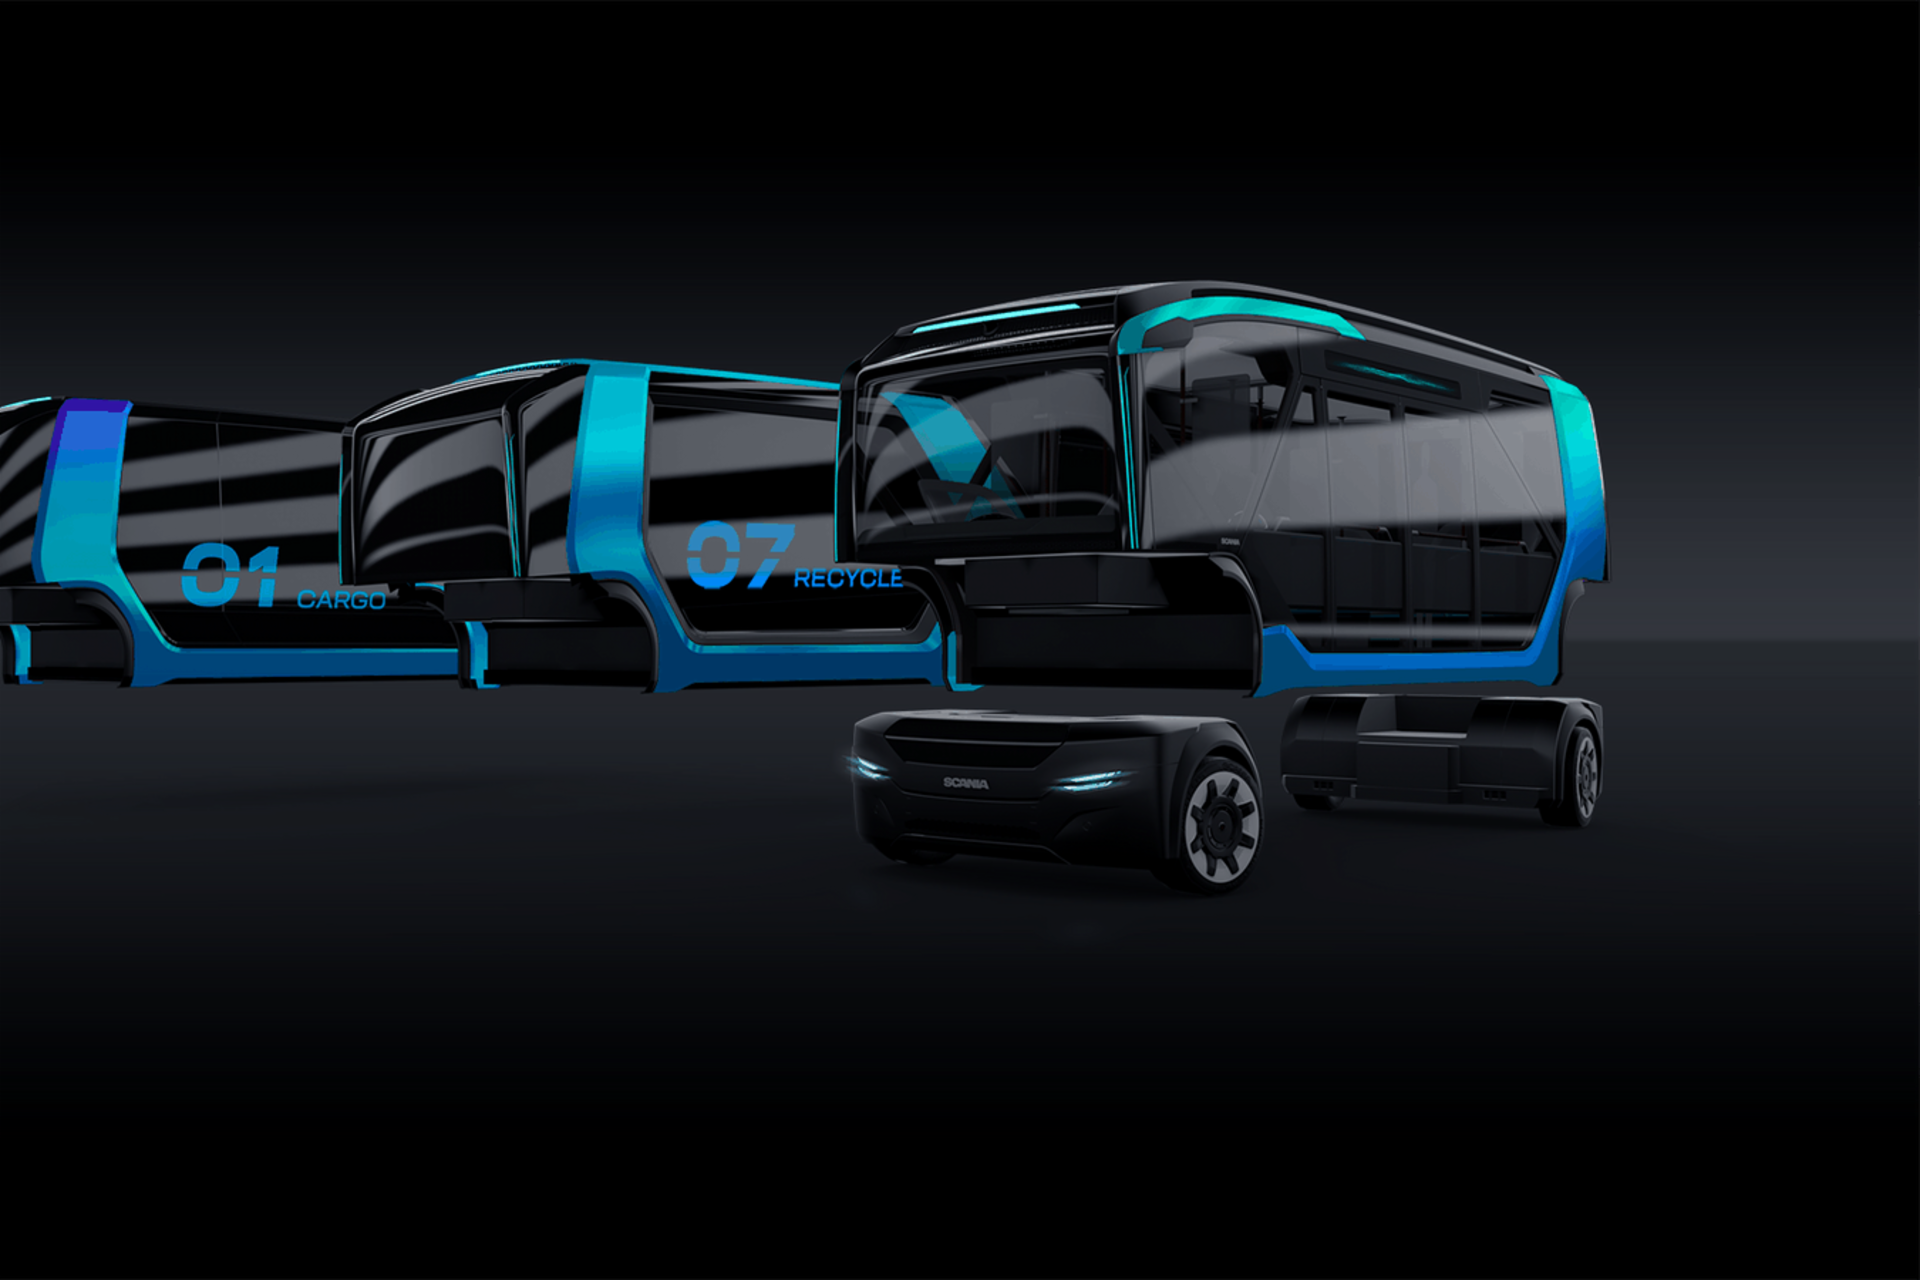 Scania’s new battery electric self-driving urban concept vehicle